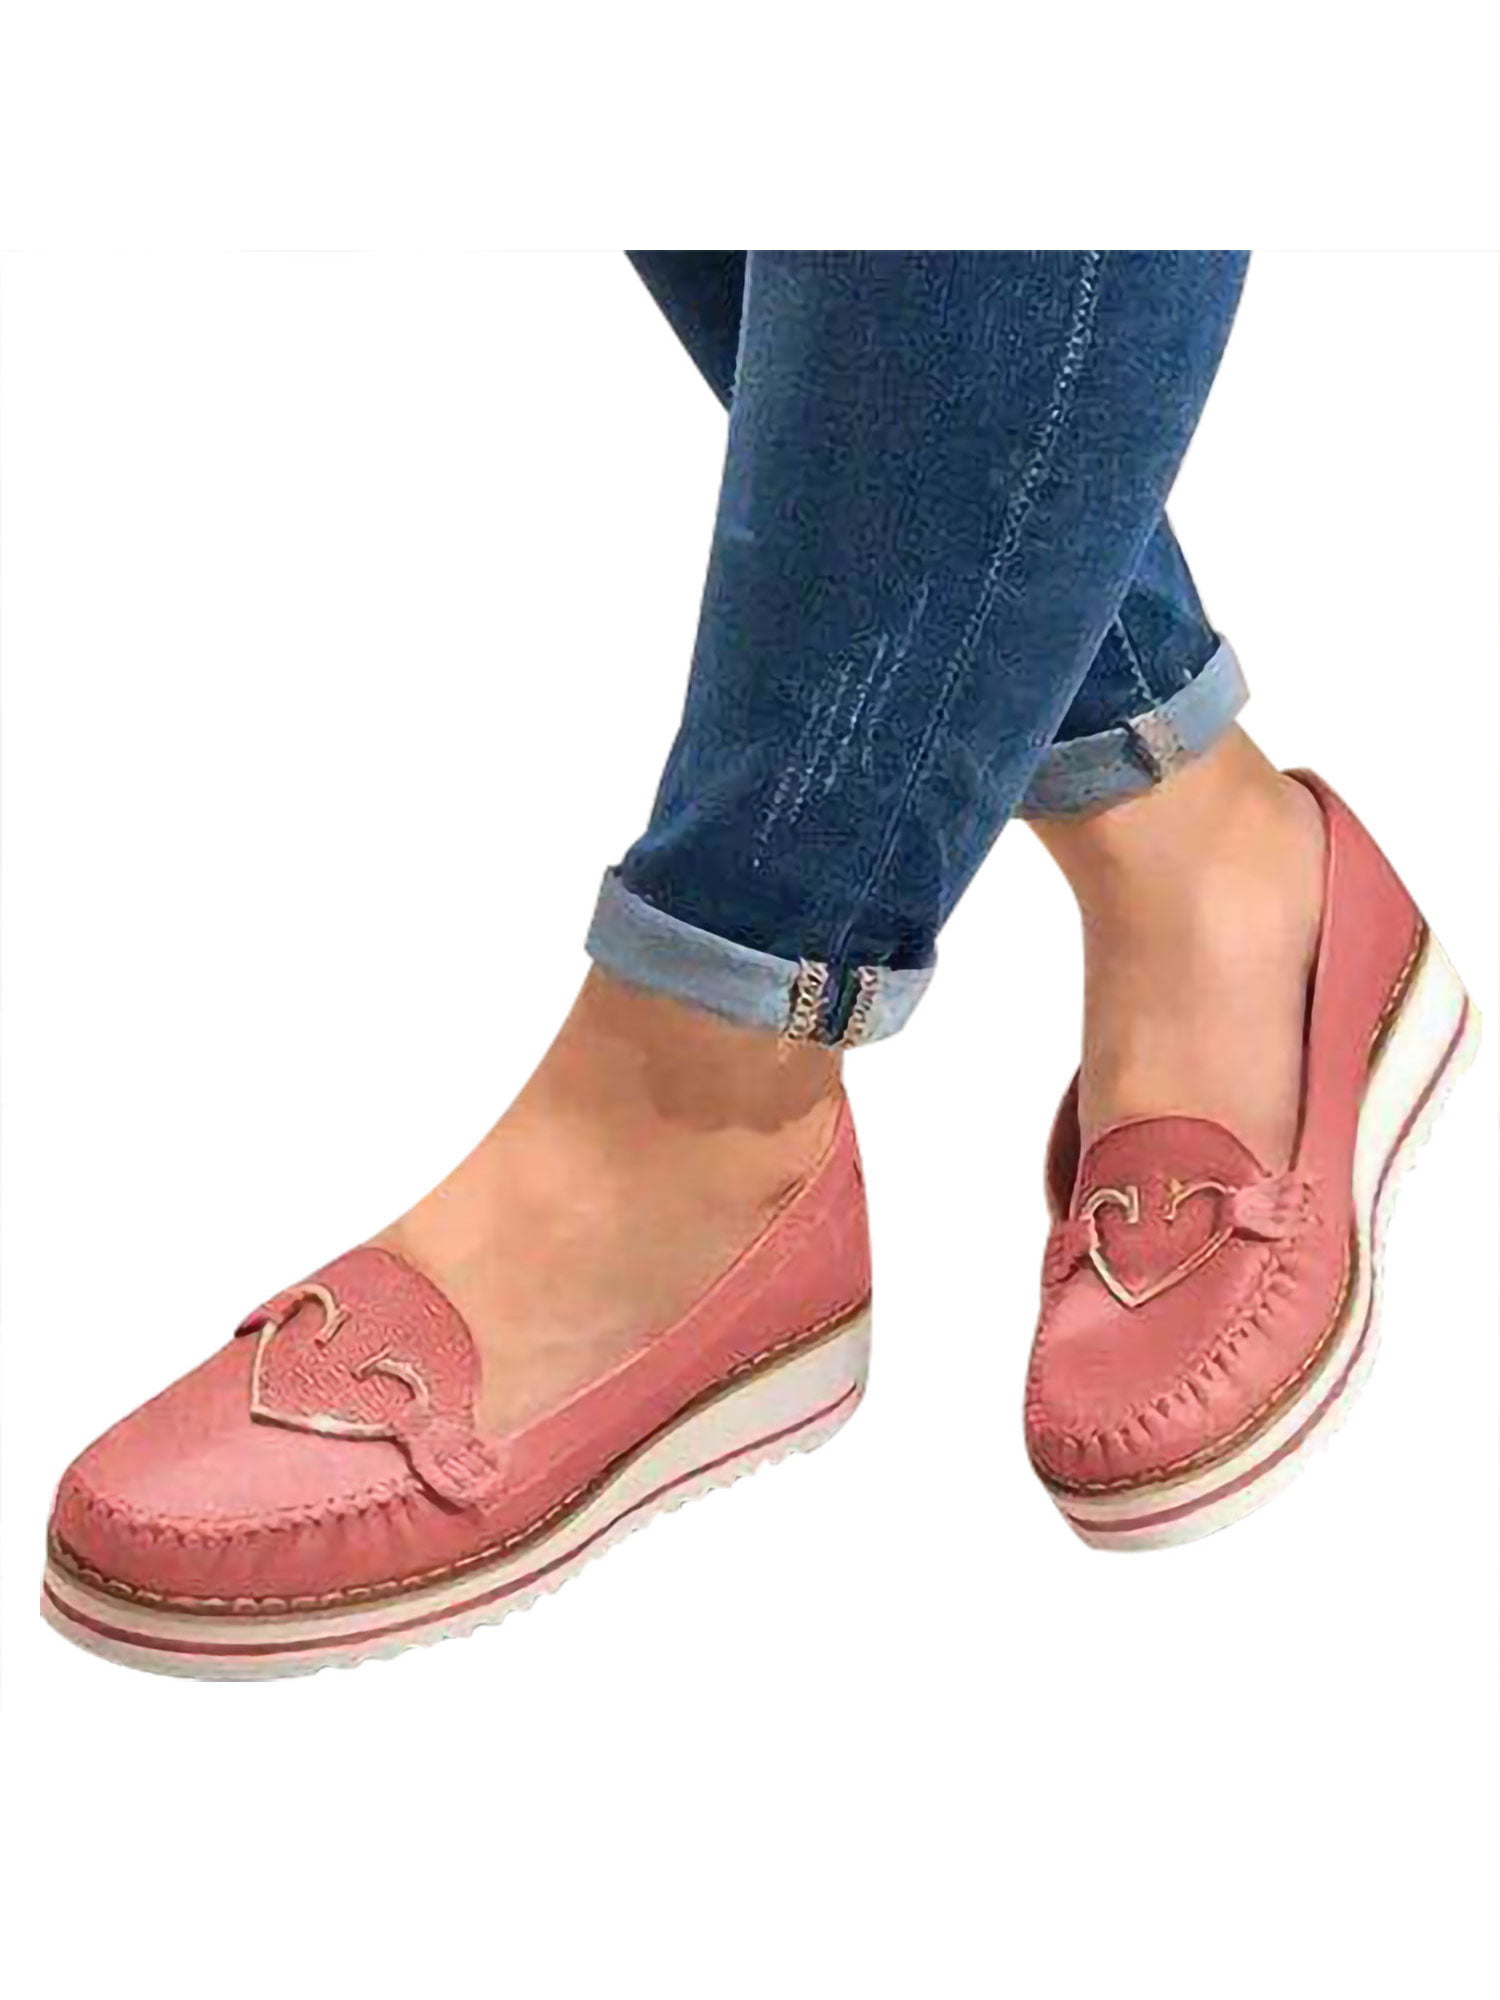 New Ladies Womens slip on flat moccasin loafers comfort pumps casual shoes uk3-8 